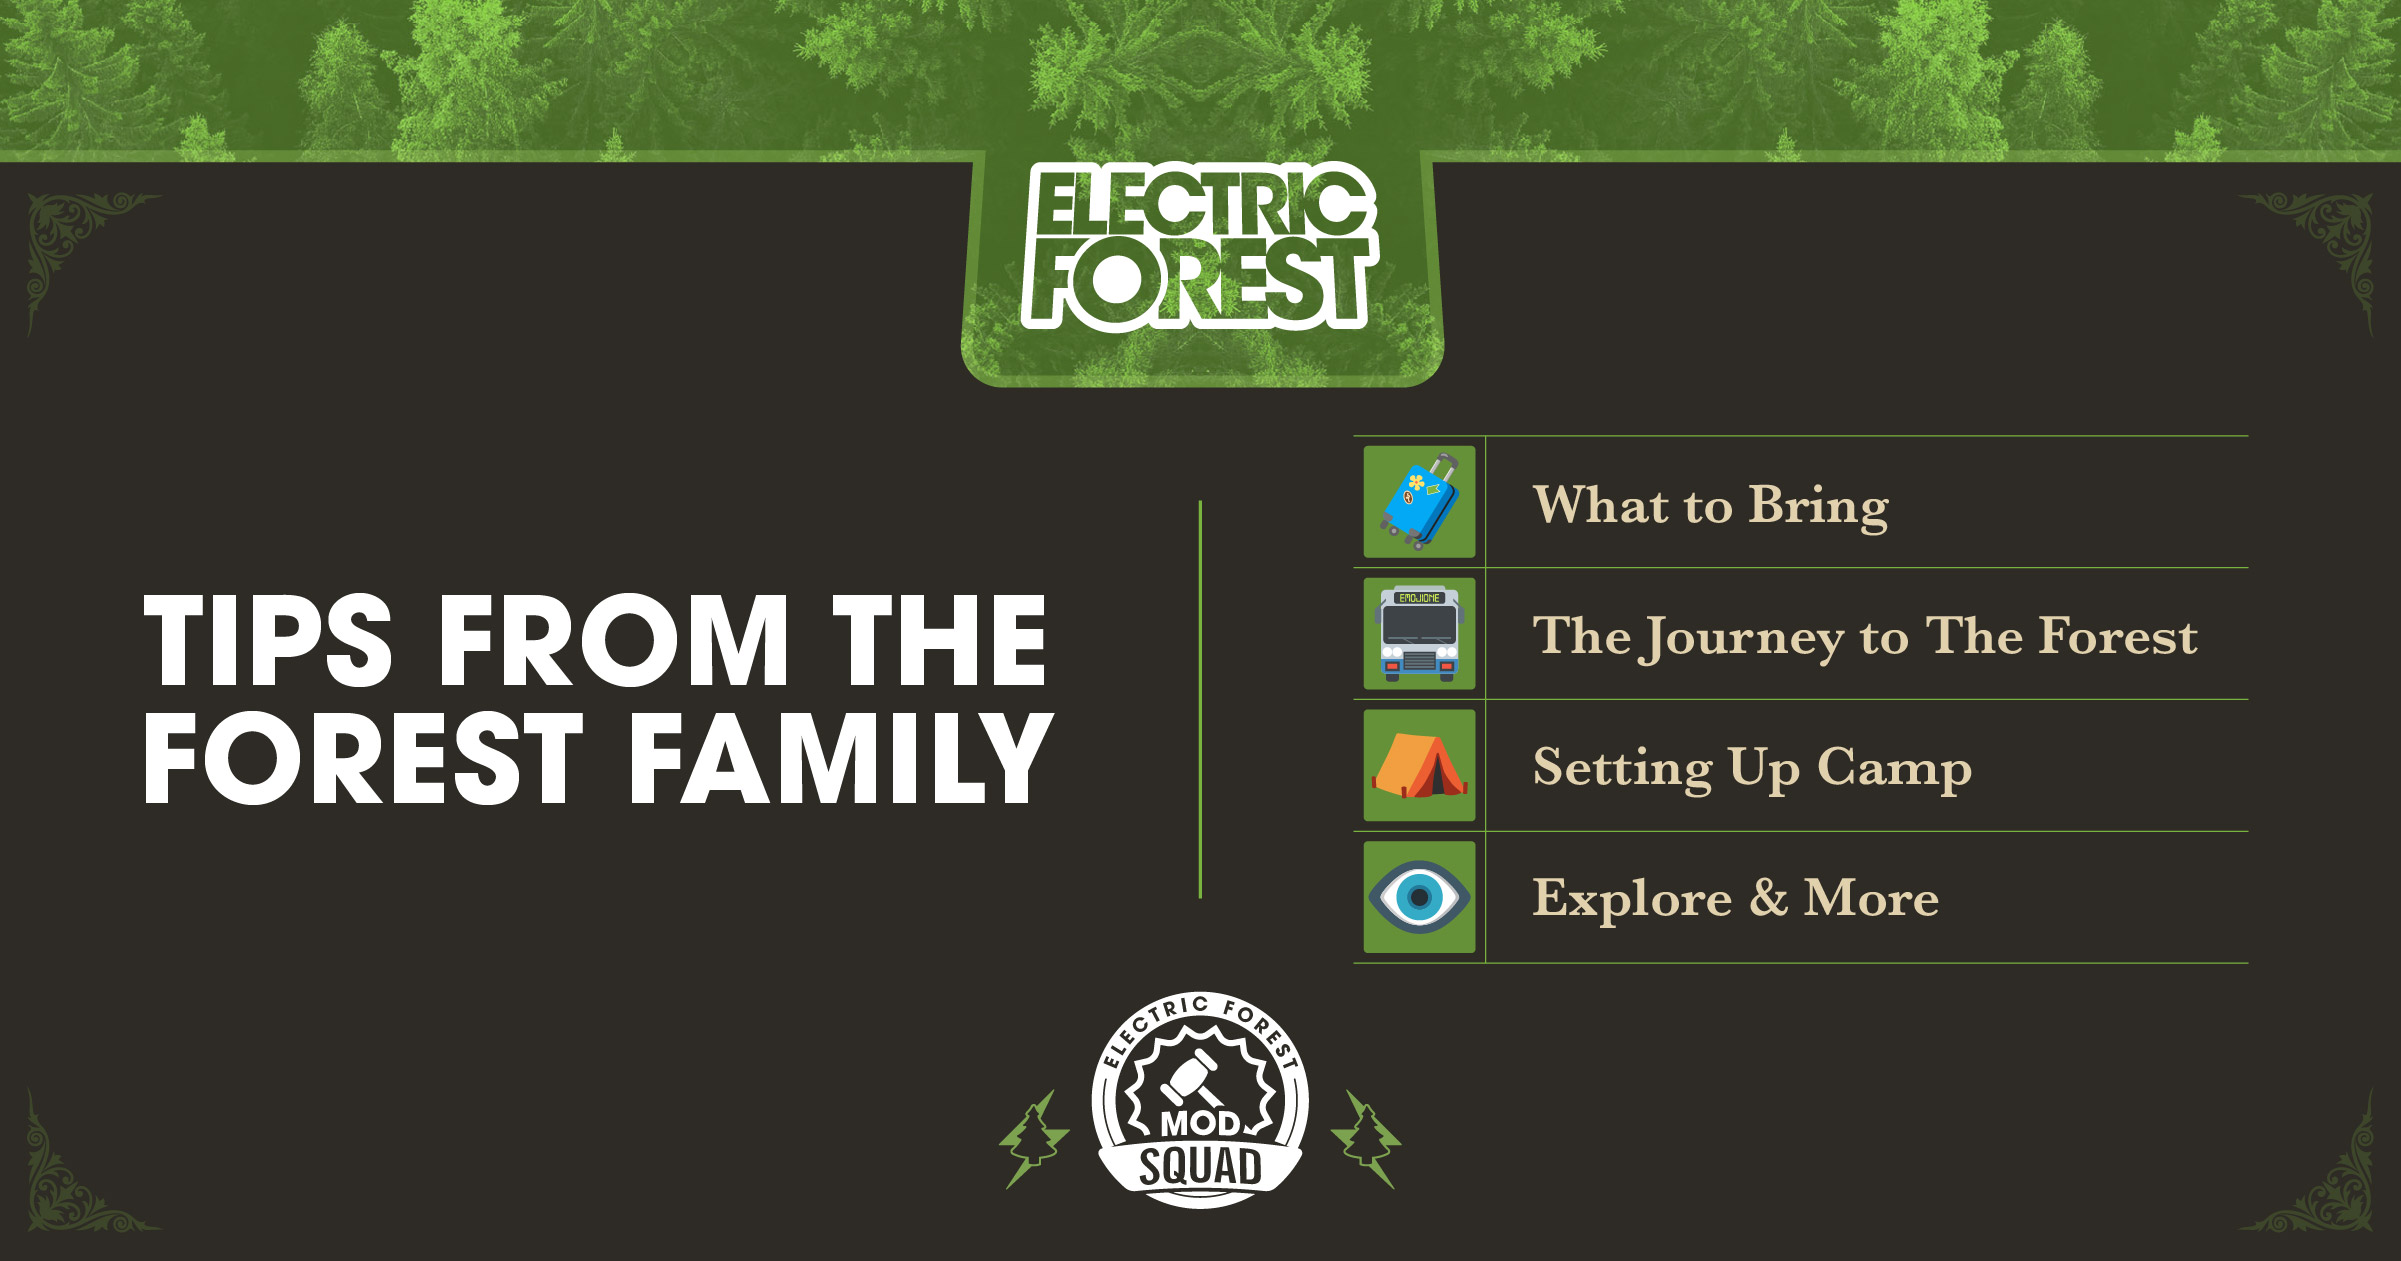 Tips from the forest family